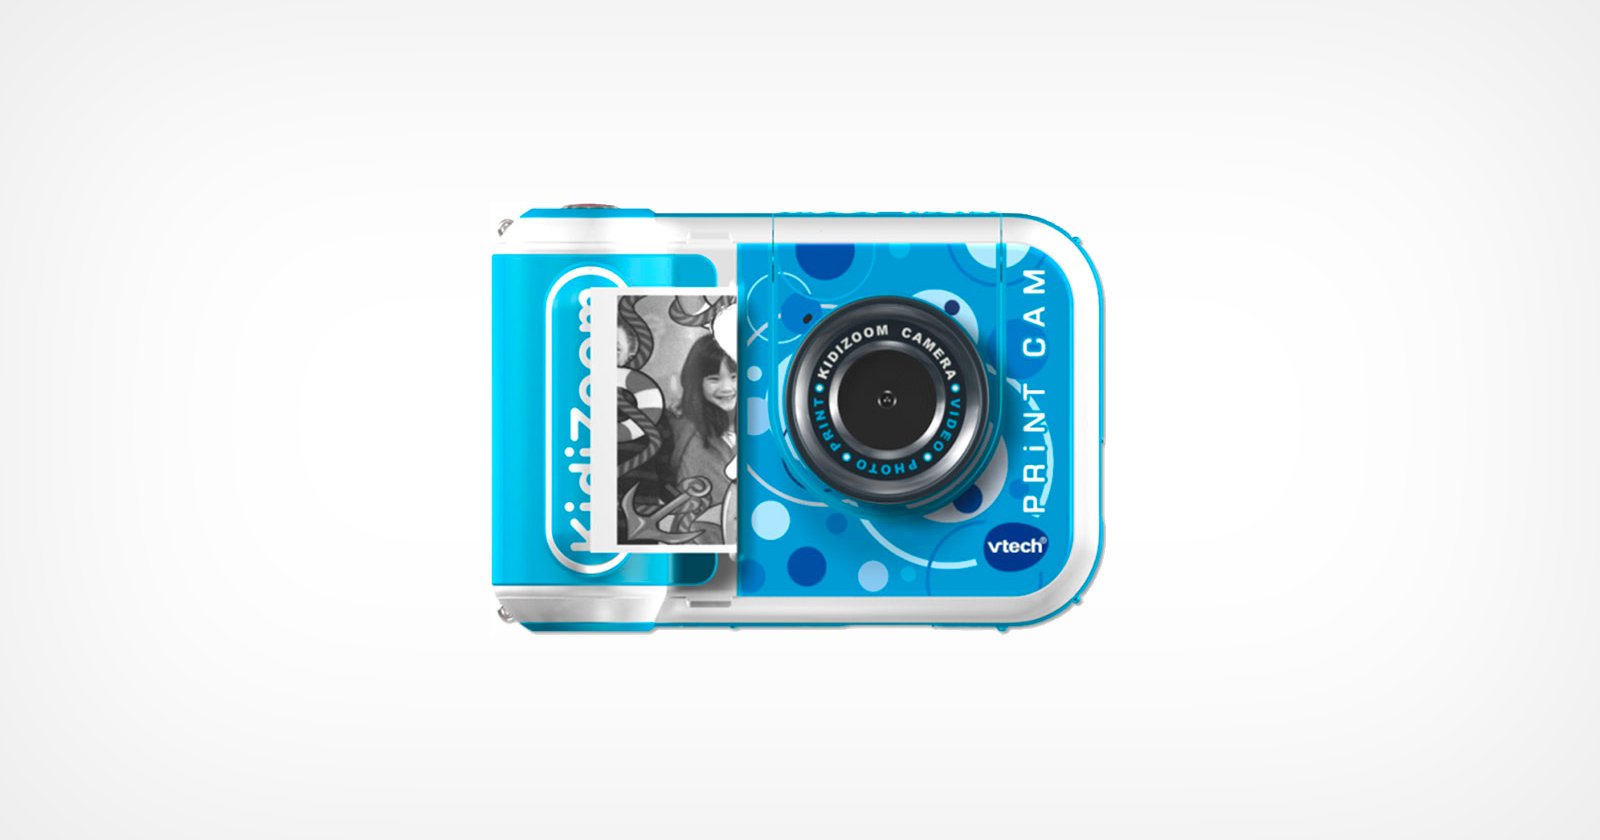 Product Review: VTech Kidizoom Camera Pix for Kids